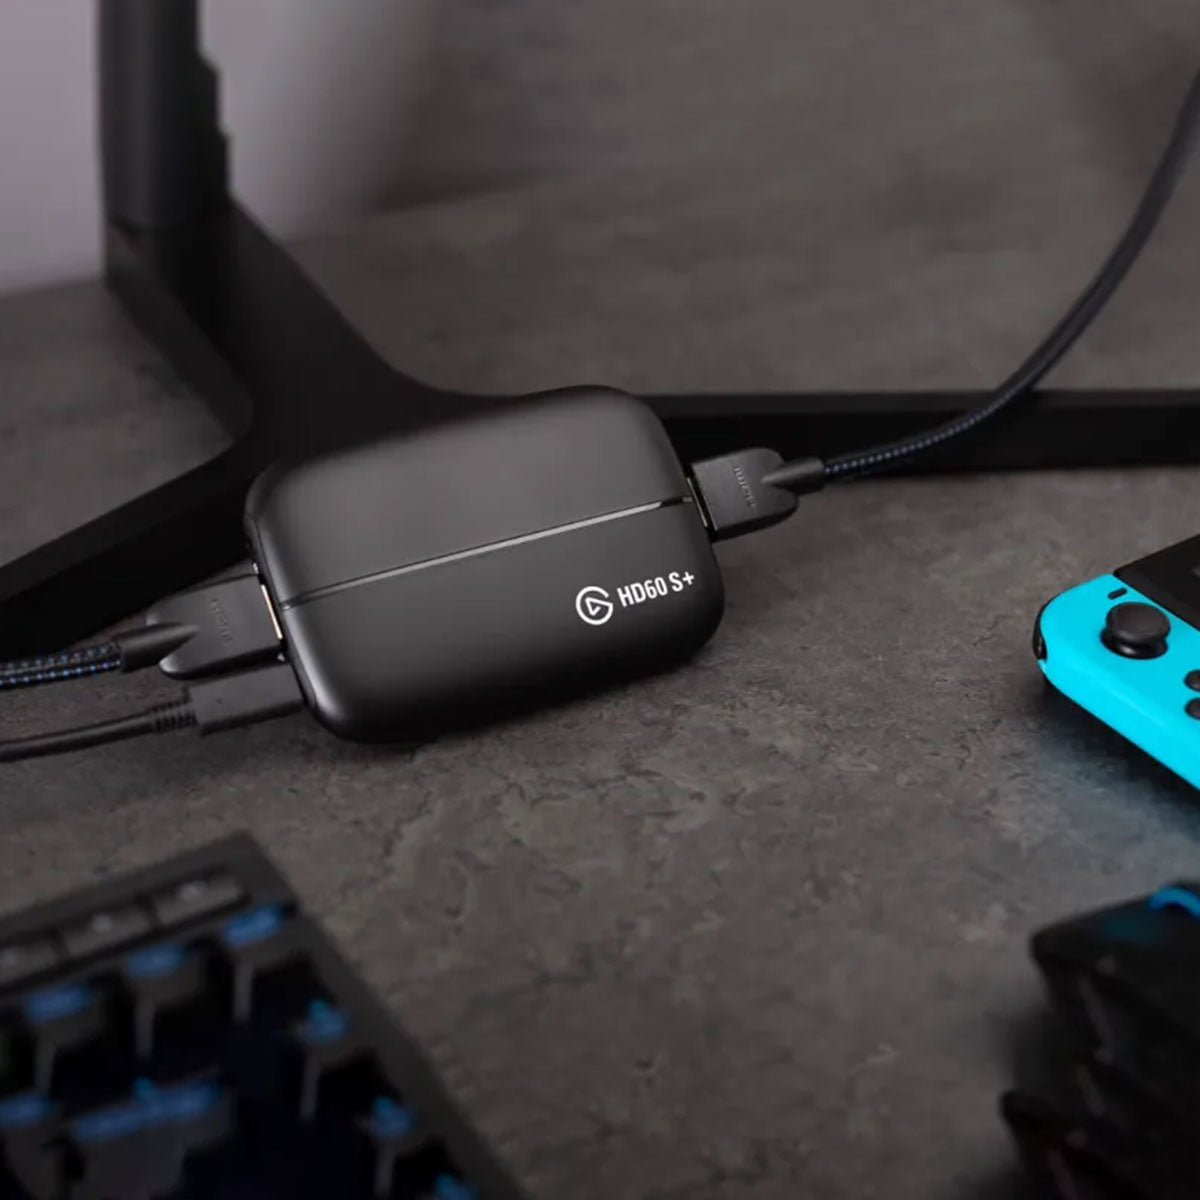 The Elgato Cam Link 4K vs the Elgato HD60 S+ — Which is better for